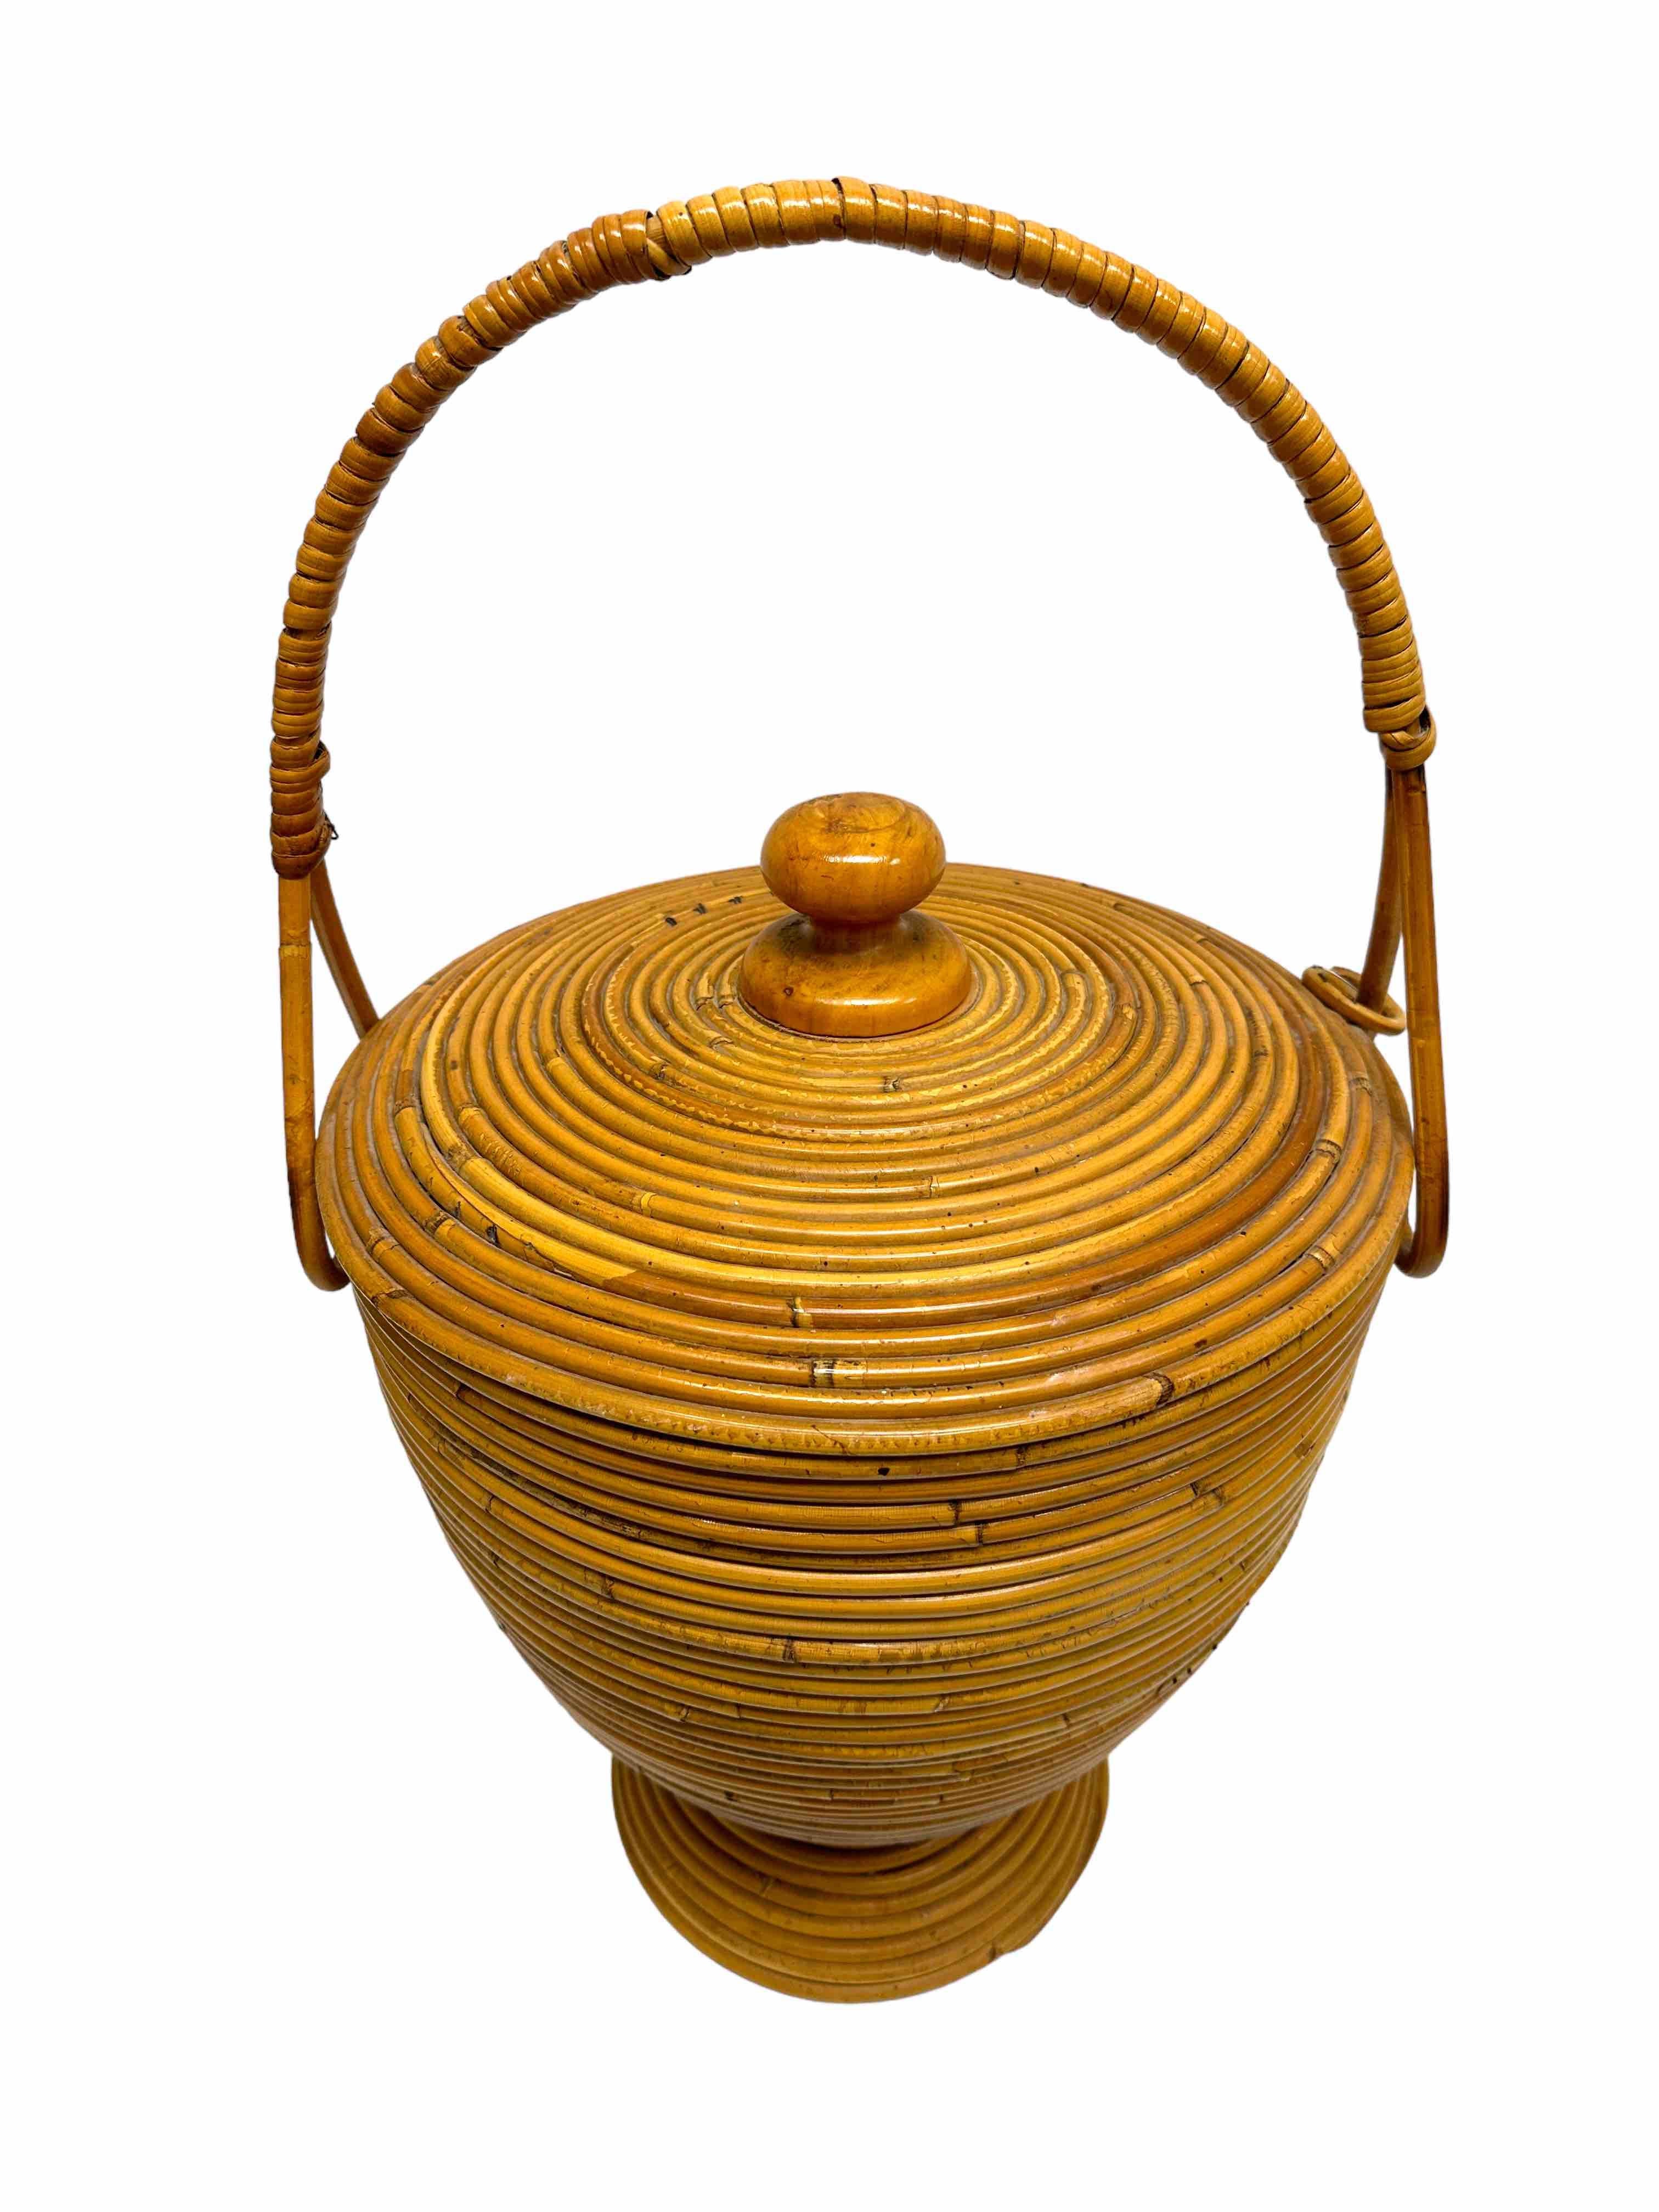 Beautiful Vivai del Sud Bamboo Rattan Decorative Basket Catchall, 1970s, Italy For Sale 5